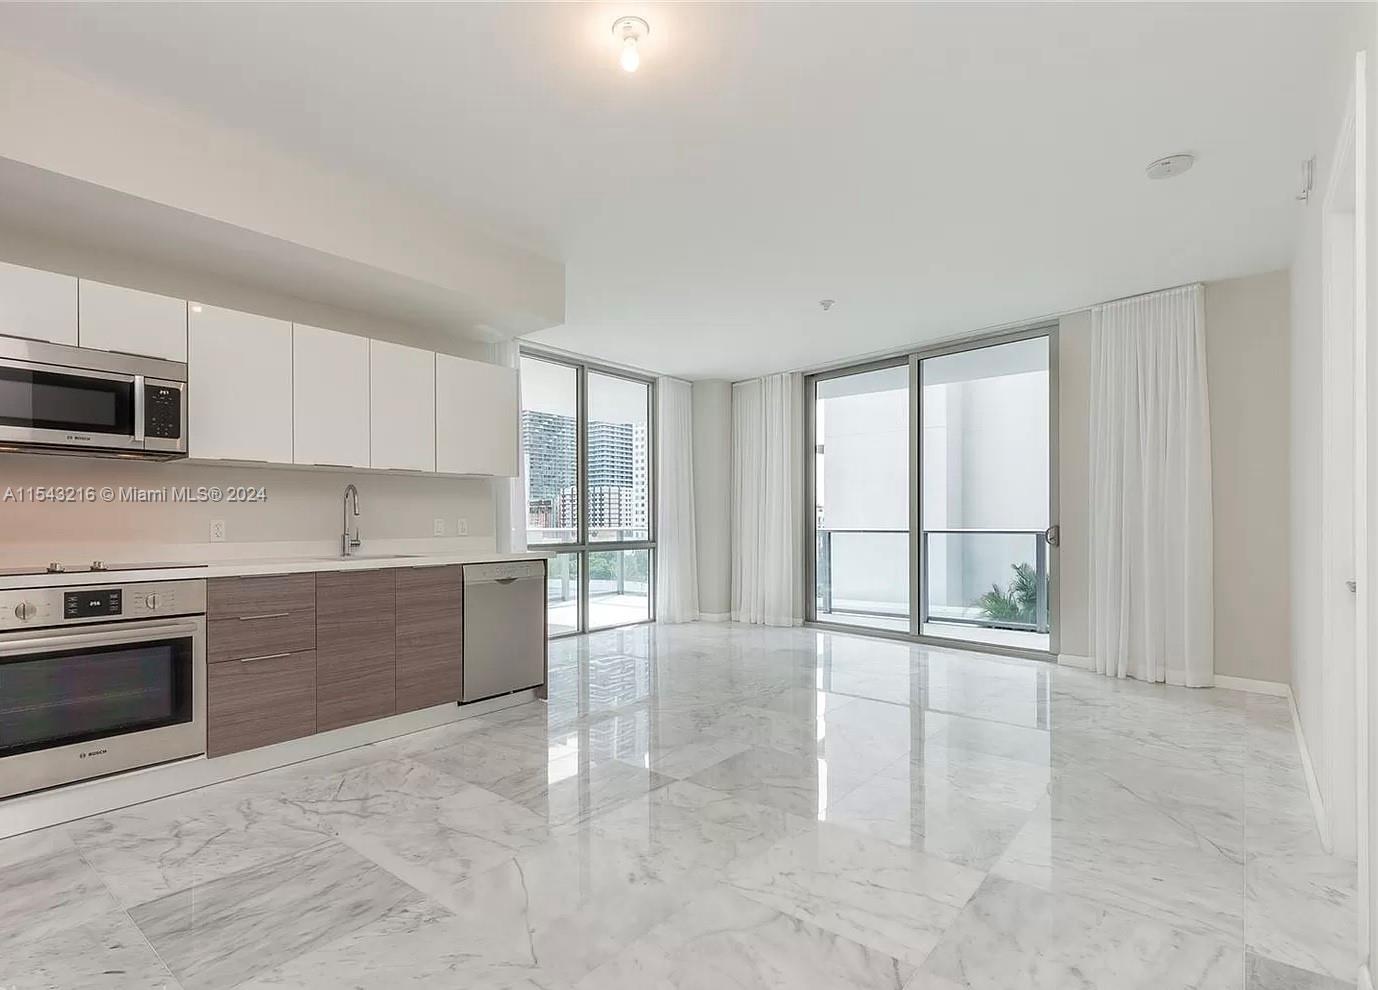 Brickell Ten Condo: Modern living in this 2017-built, 1273 SqFt corner unit. 
Features 3 bedrooms, 1 enclosed DEN, 2 assigned garage parking spaces, and 1 storage unit. It’s vacant and move-in ready: freshly painted, marble floors restored and polished. Easy to show! Contact me for showings and video.  
Enjoy a spacious 285.6 SqFt wrap-around terrace, open layout with 9’ ceilings, and floor-to-ceiling sliding glass doors. Italian kitchen with quartz countertops, Bosch appliances, and in-unit washer/dryer. 
Amenities include rooftop gym, barbecue, 1600 sq ft pool, and social club with billiard on the 5th floor. Located just 1 block from Publix and 2 blocks from City Centre. Perfectly positioned for convenience and luxury